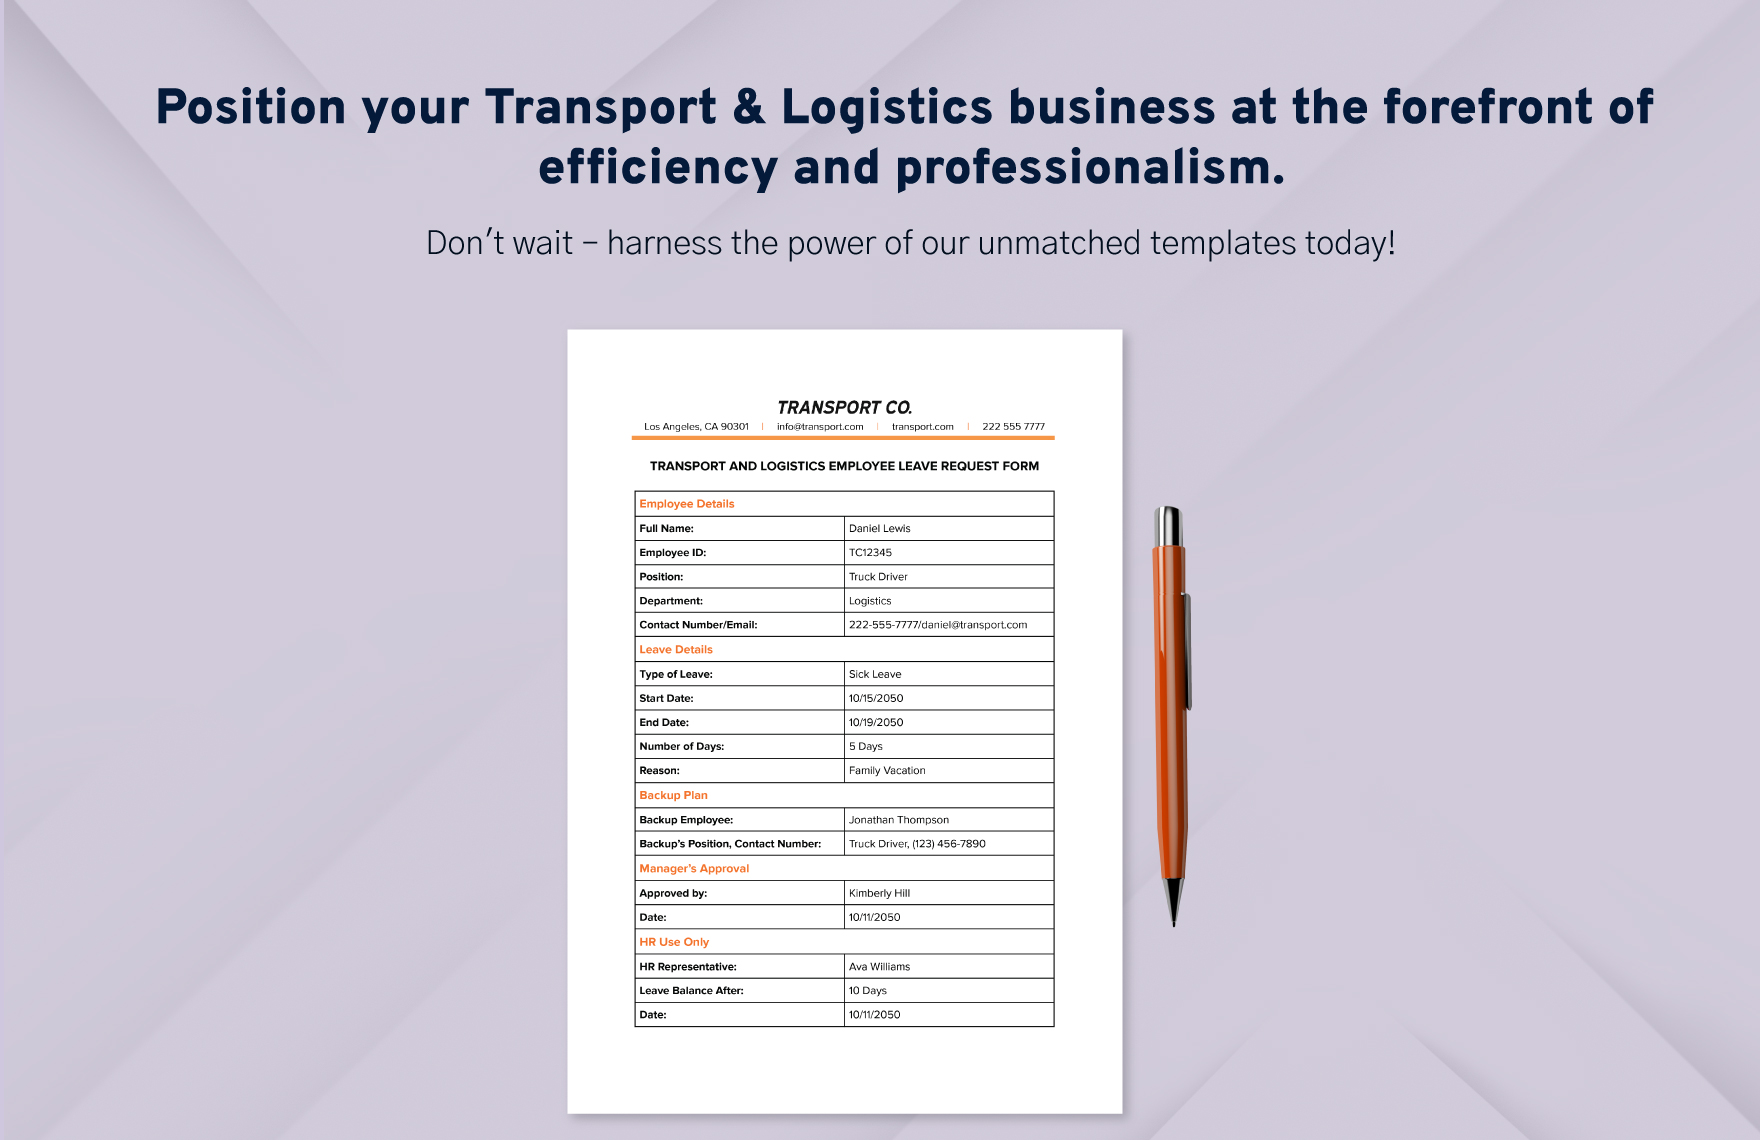 Transport and Logistics Employee Leave Request Form Template